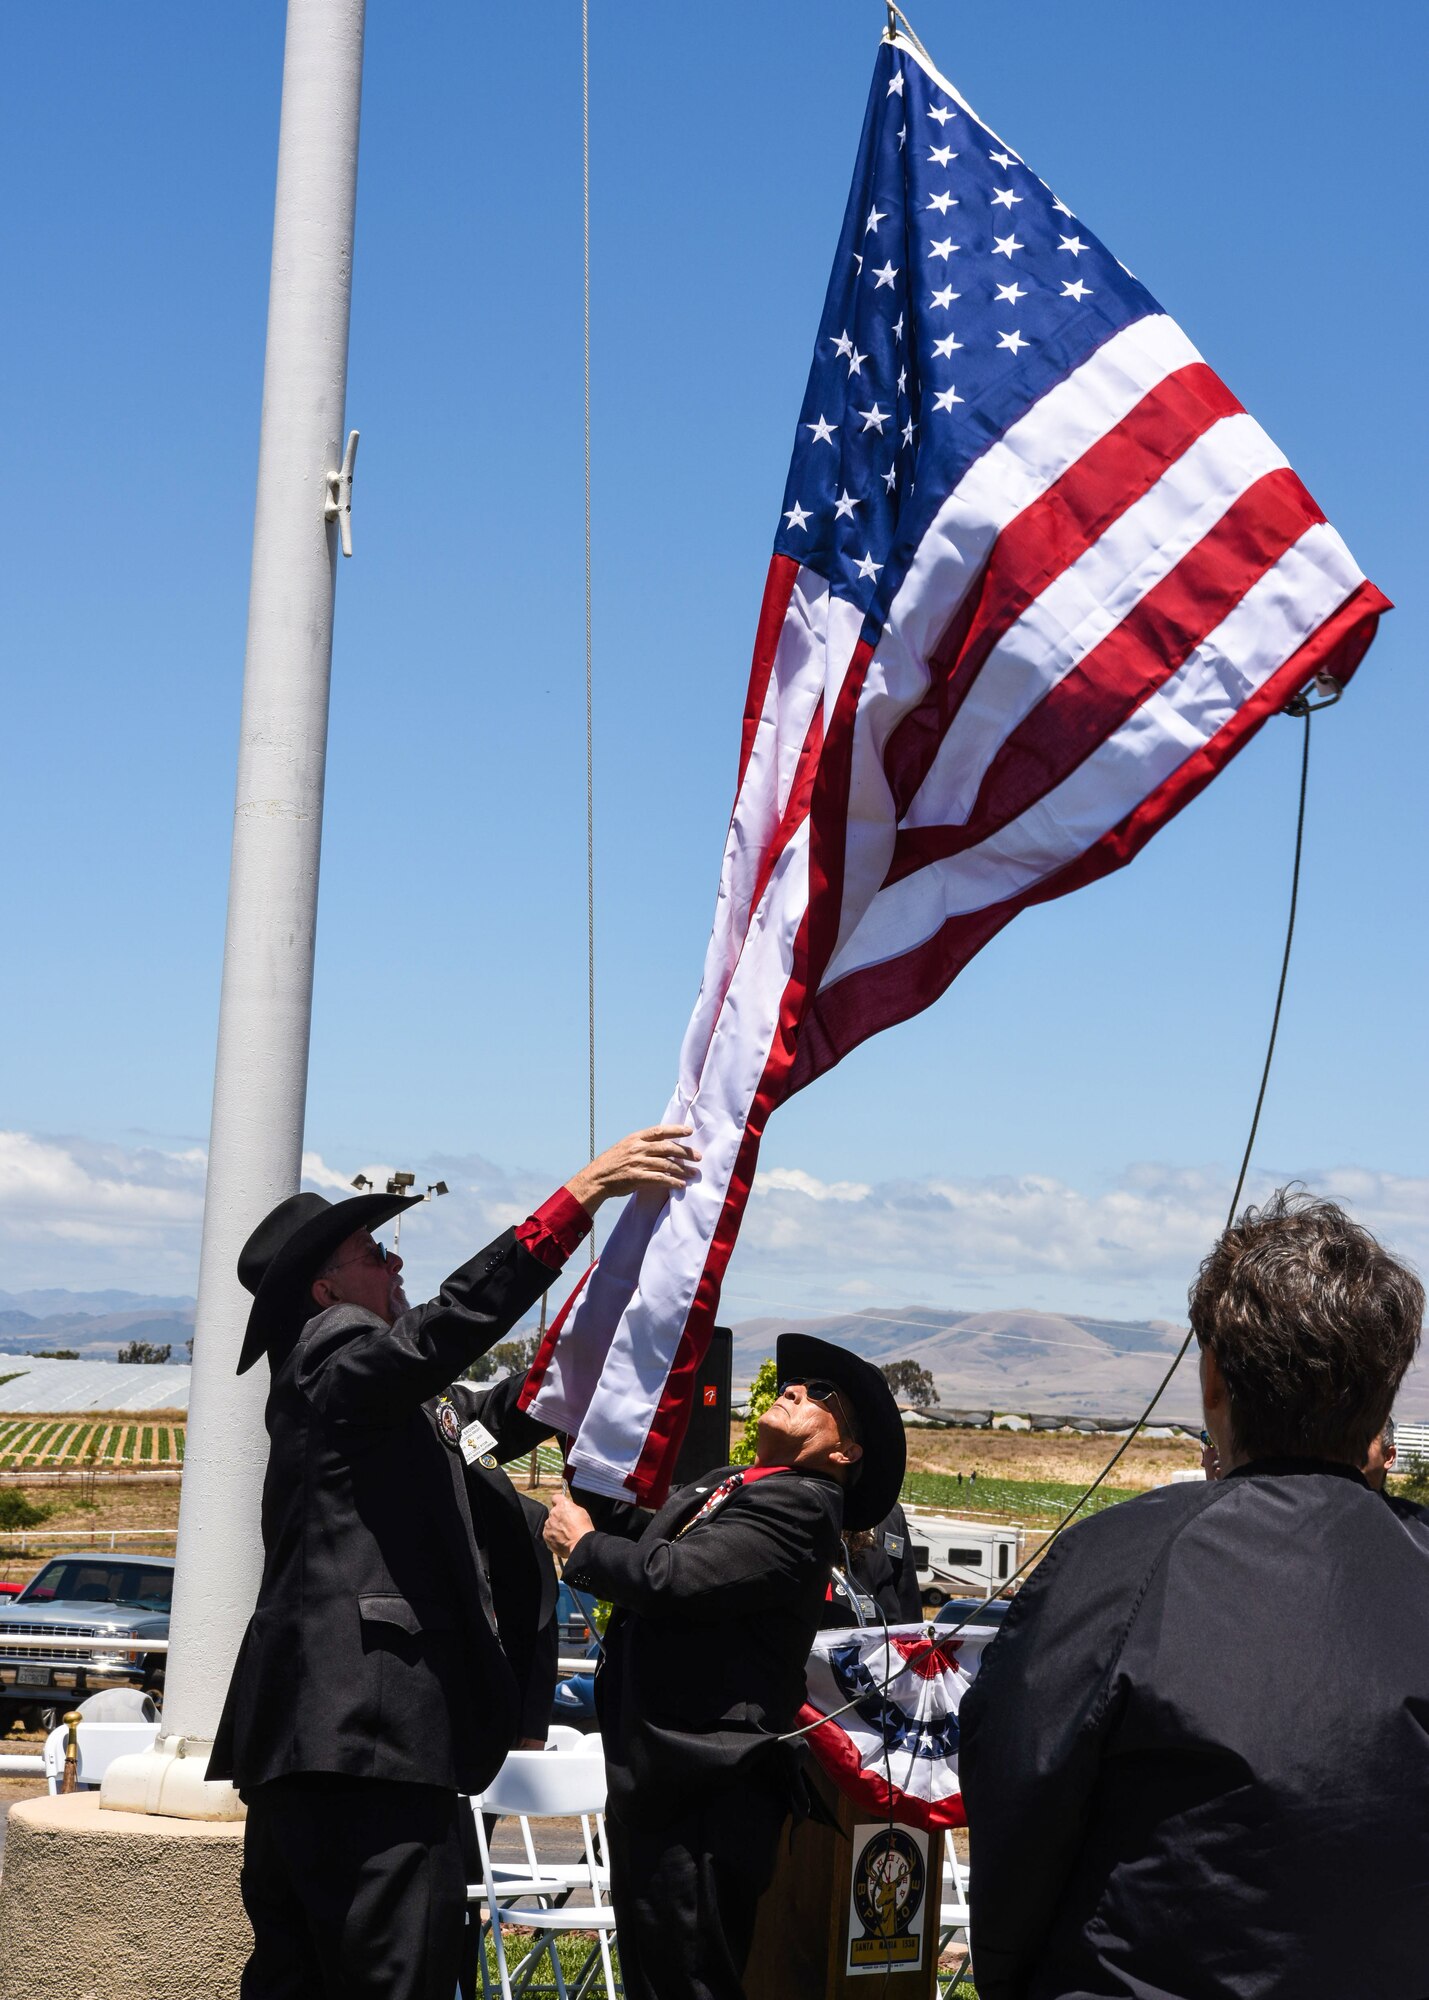 Wes Brown, Santa Maria Elks Lodge leading knight, and Tony Campas, Santa Maria Elks Lodge exalted ruler, raise the American flag during a Memorial Day ceremony May 27, 2019, in Santa Maria, Calif.